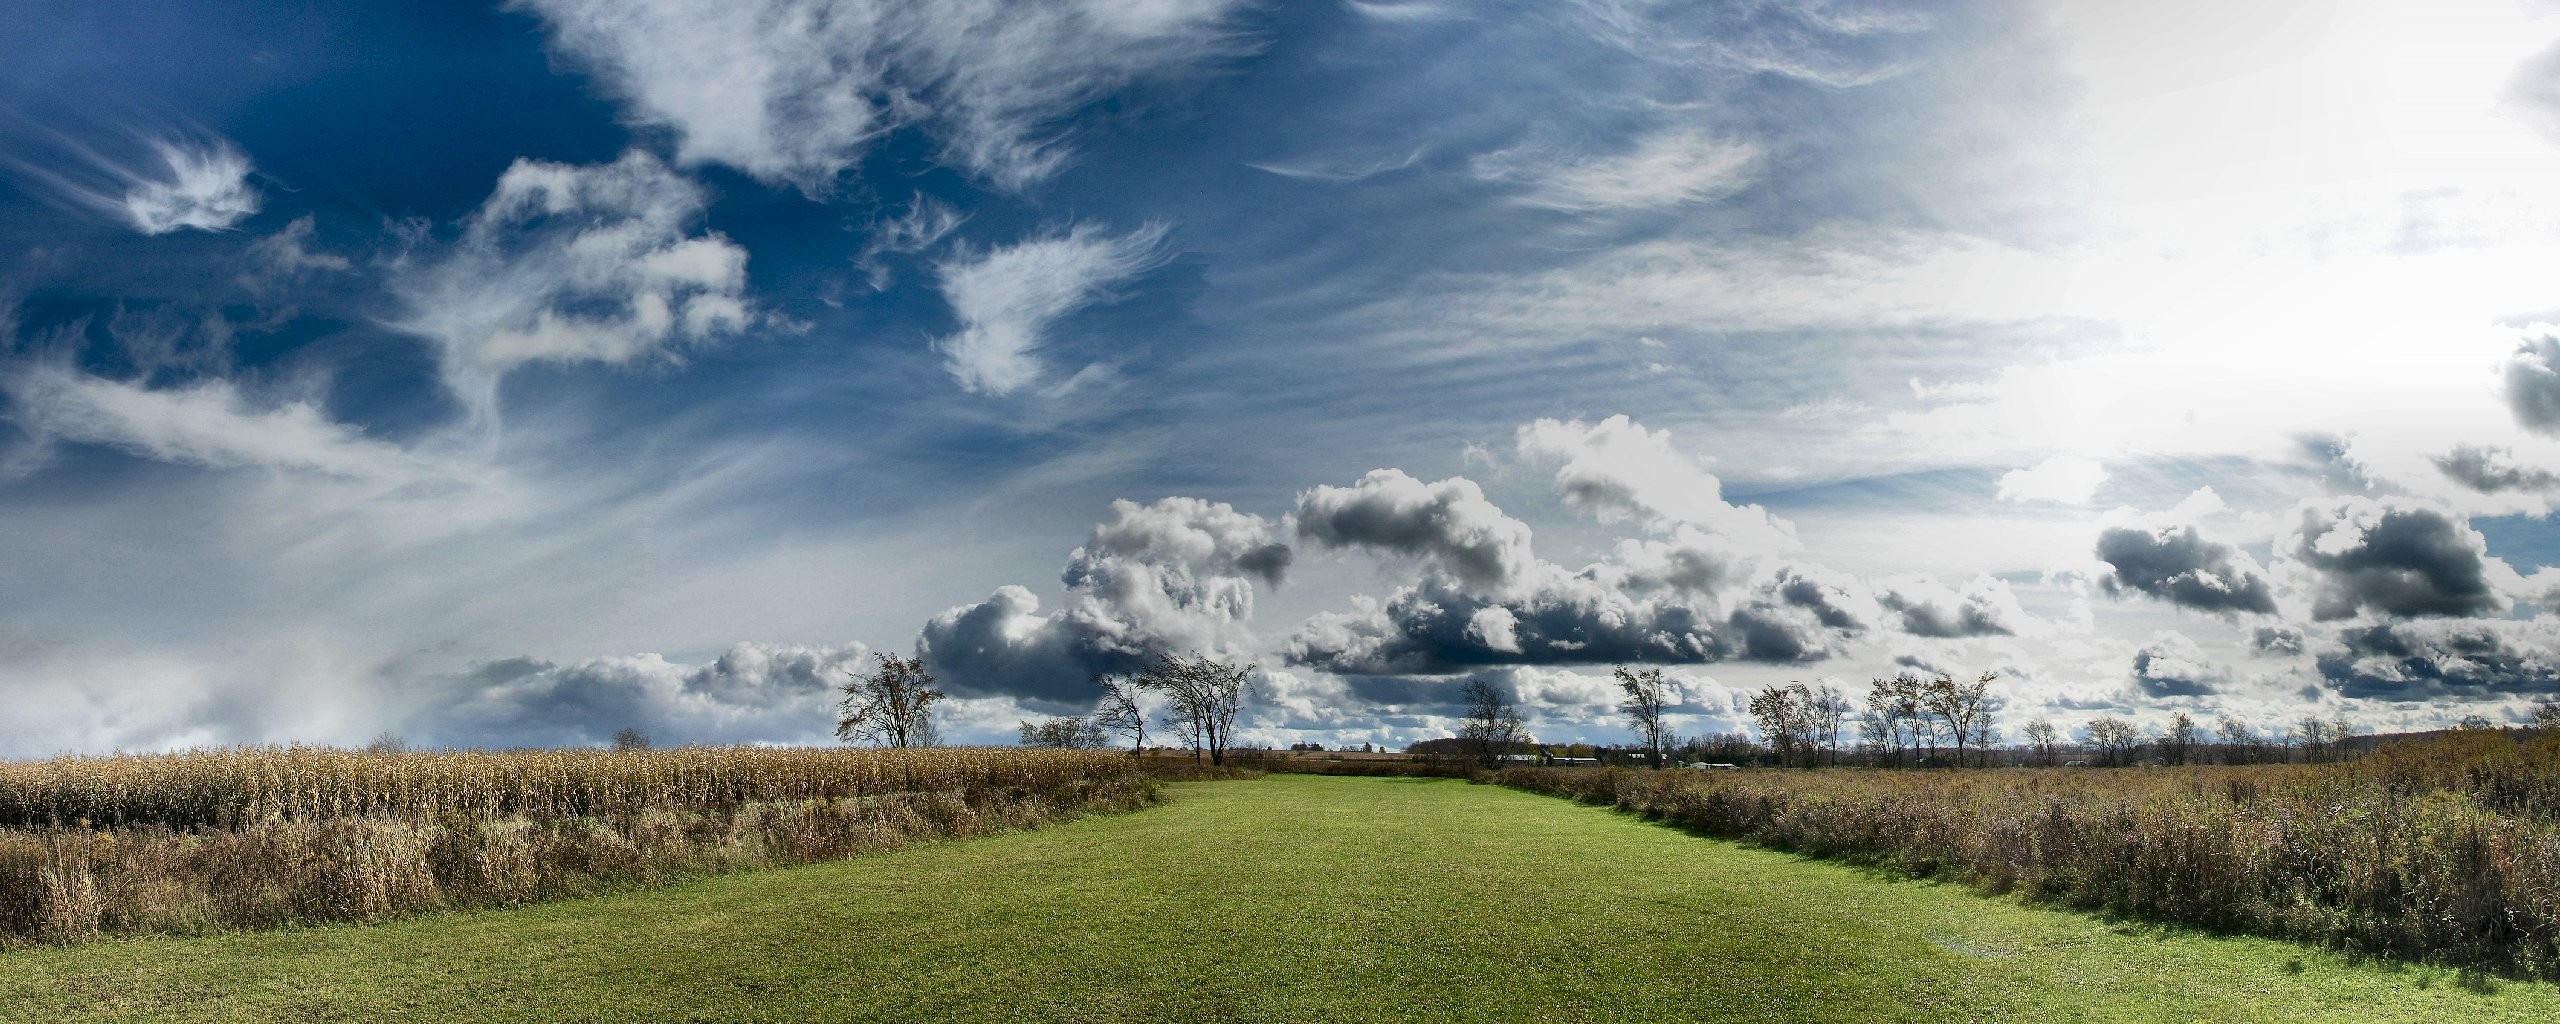 General 2560x1024 sky clouds field outdoors